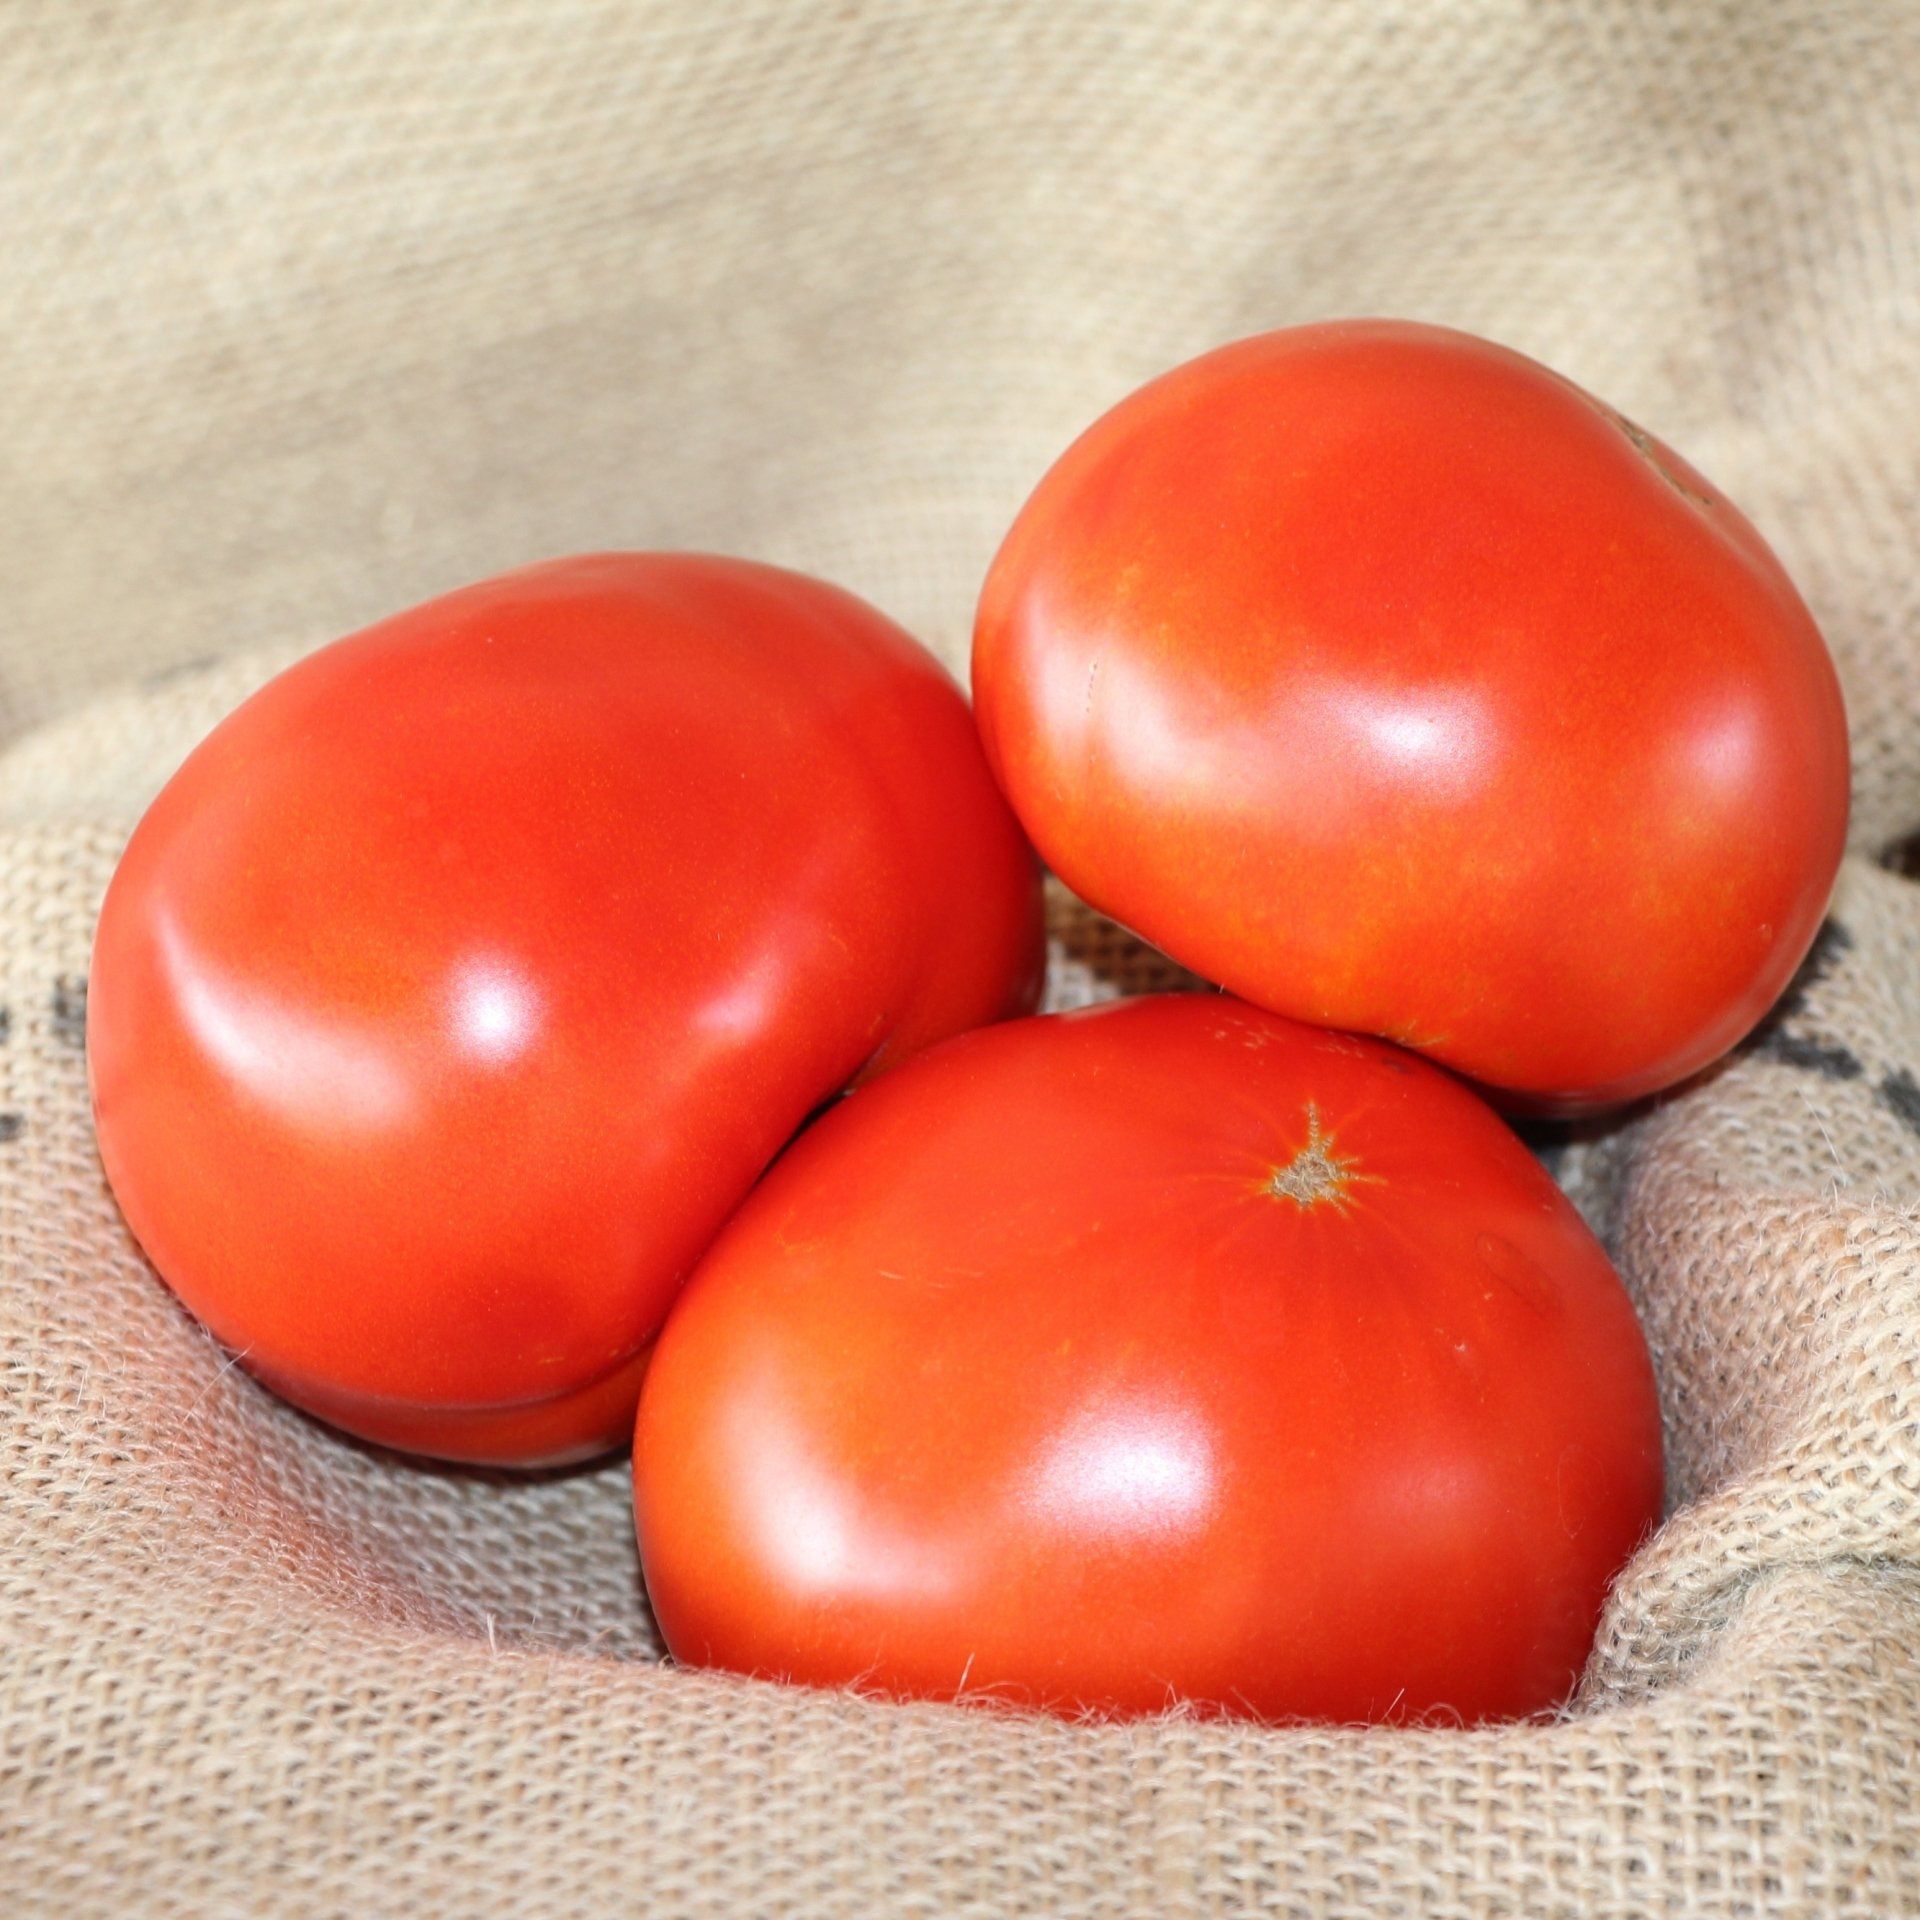 locally grown tomatoes